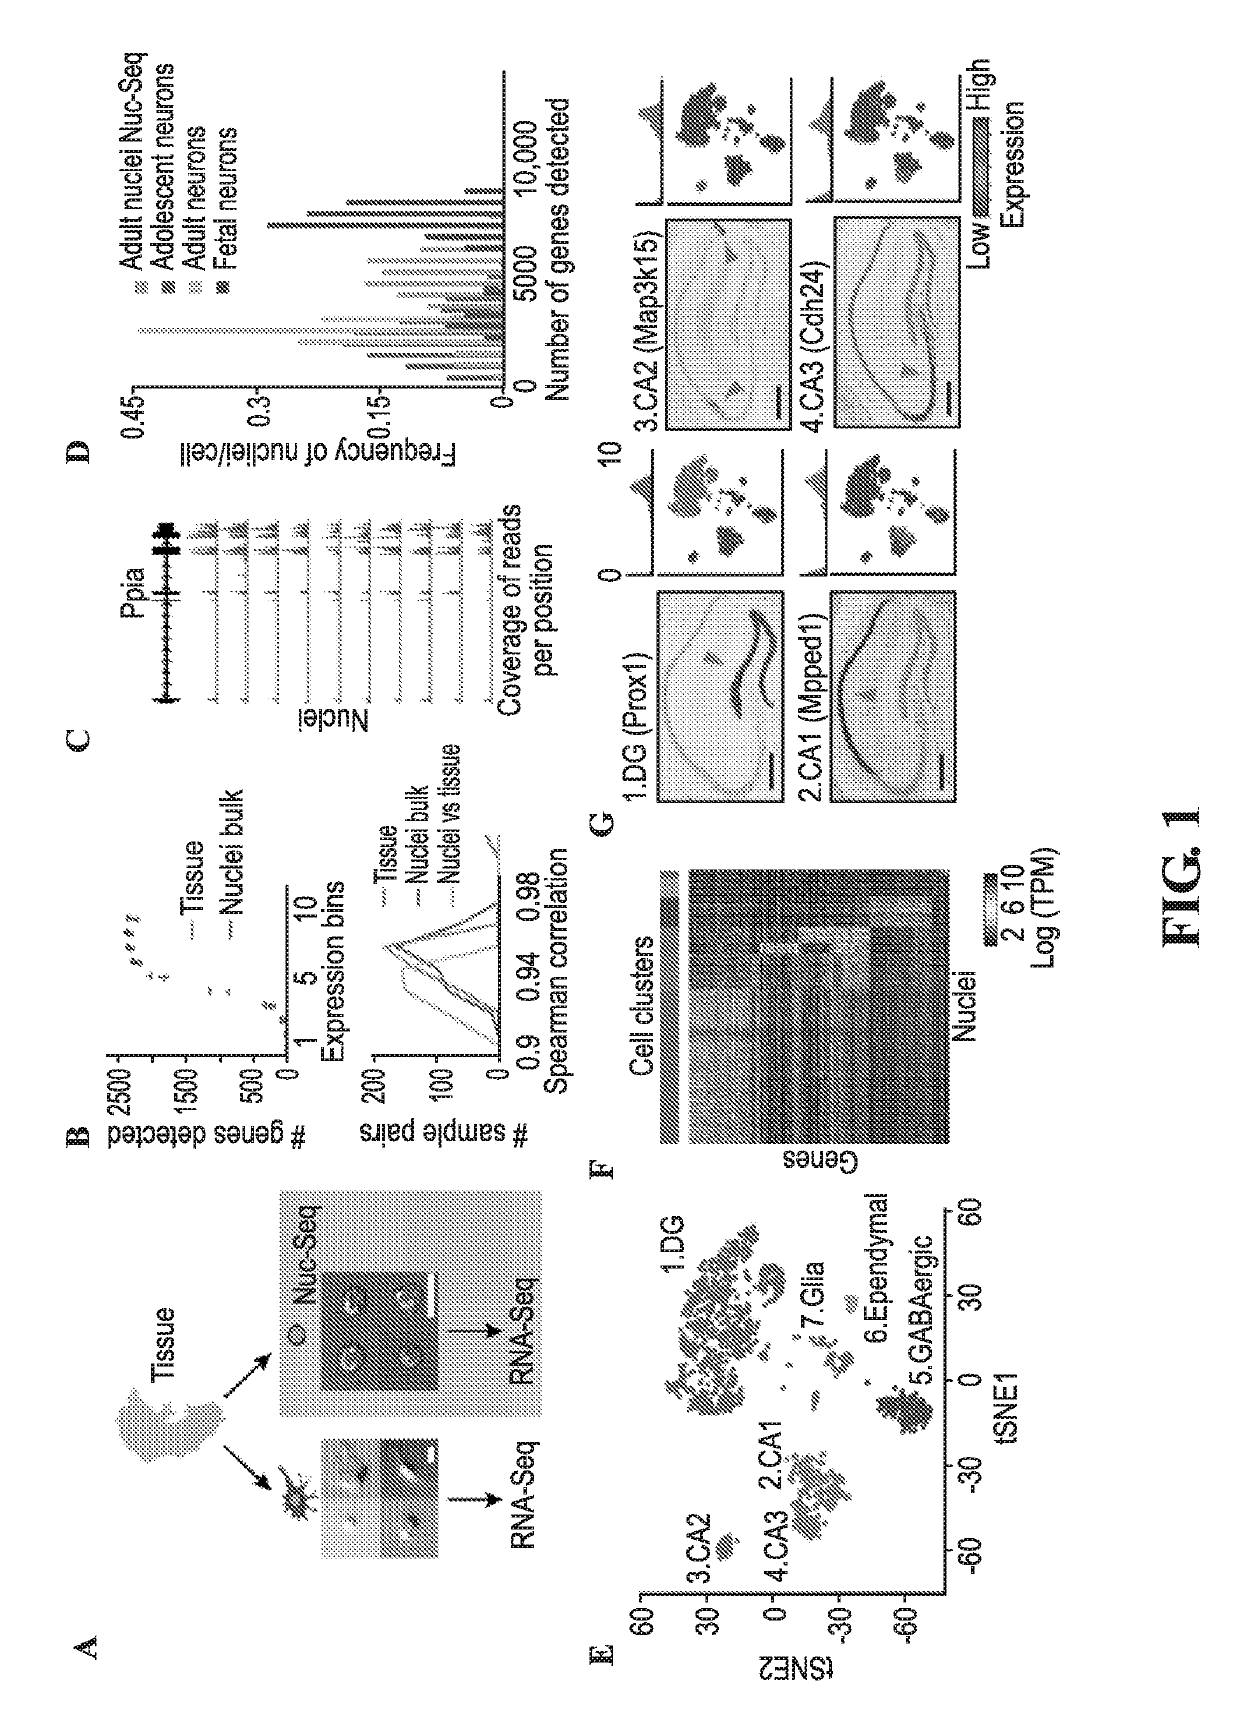 Methods for determining spatial and temporal gene expression dynamics in single cells